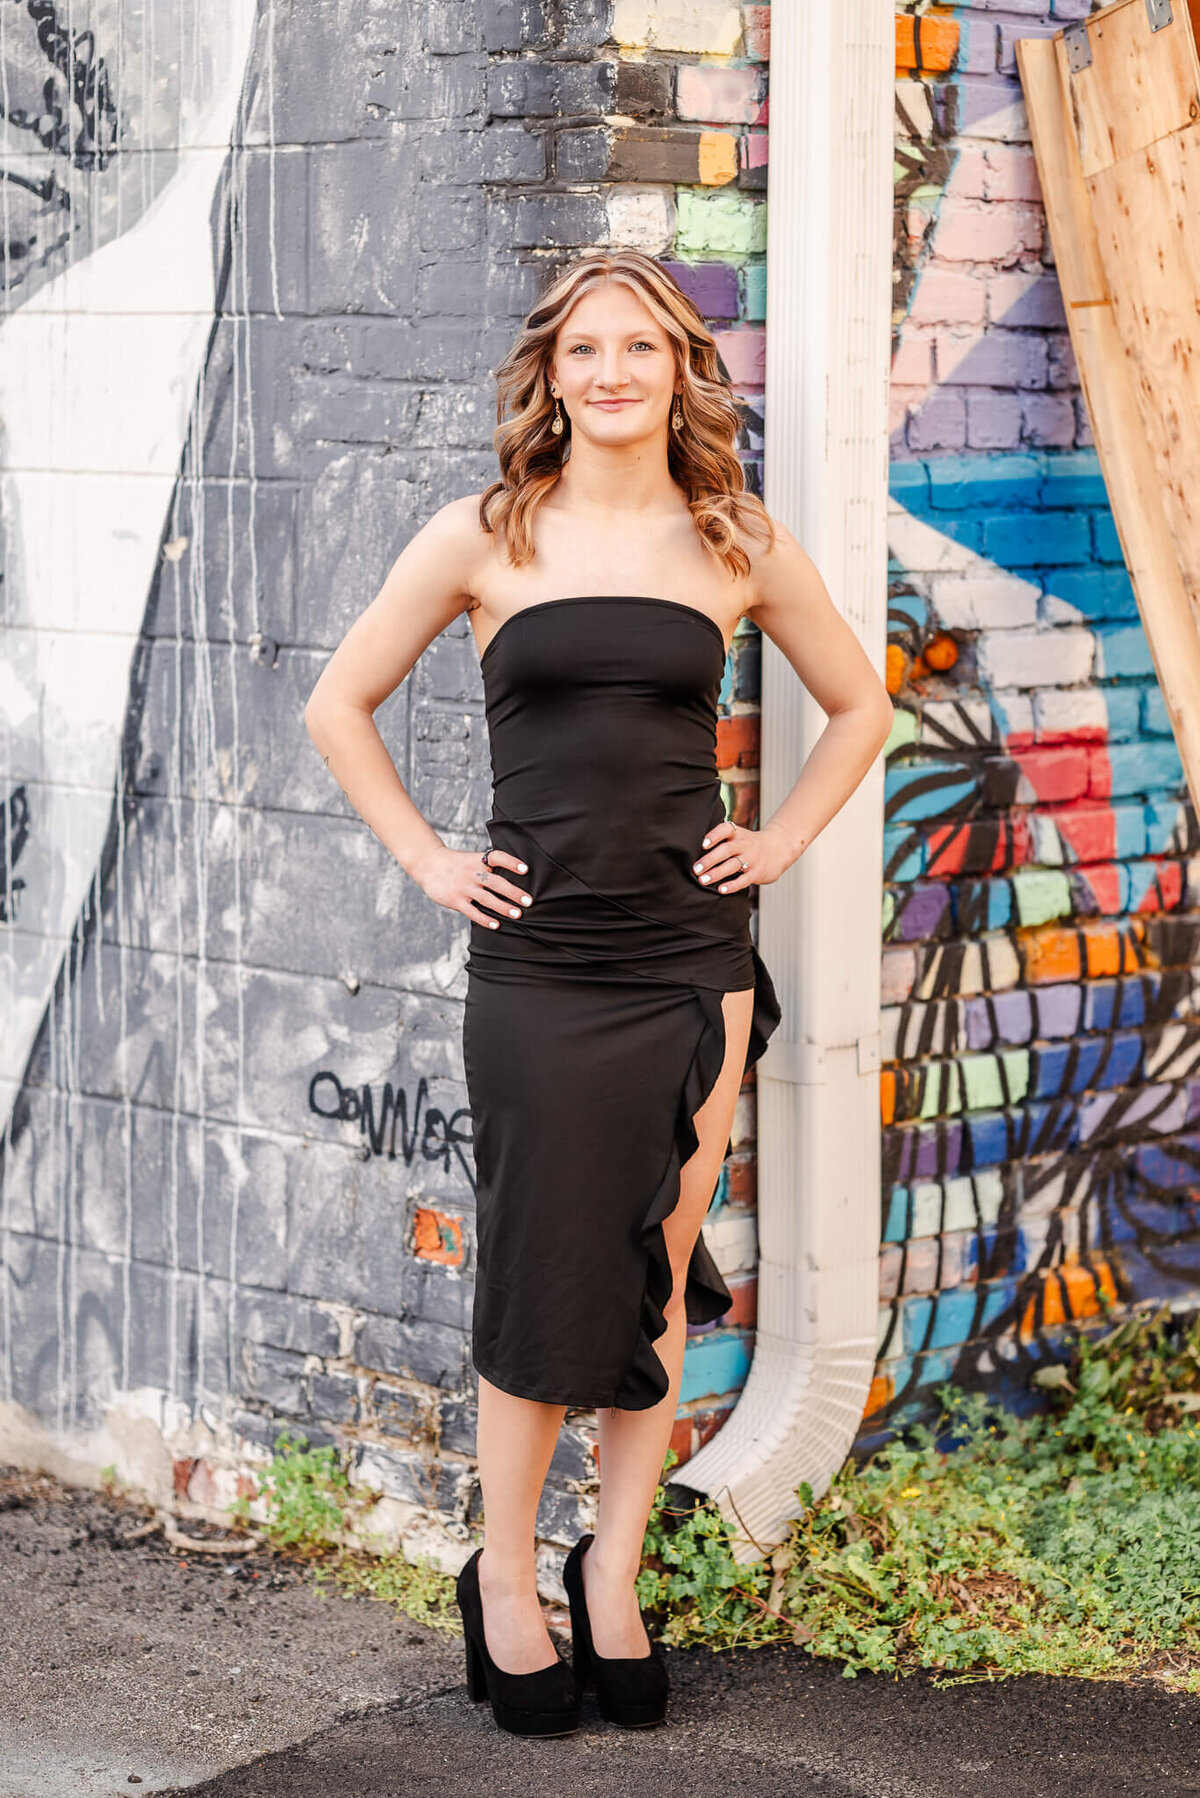 A high school senior in a black dress puts her hands on her hips and smiles. Behind her, you can see two walls with murals; one colorful and one monotone. This is the full body pull back of another image.